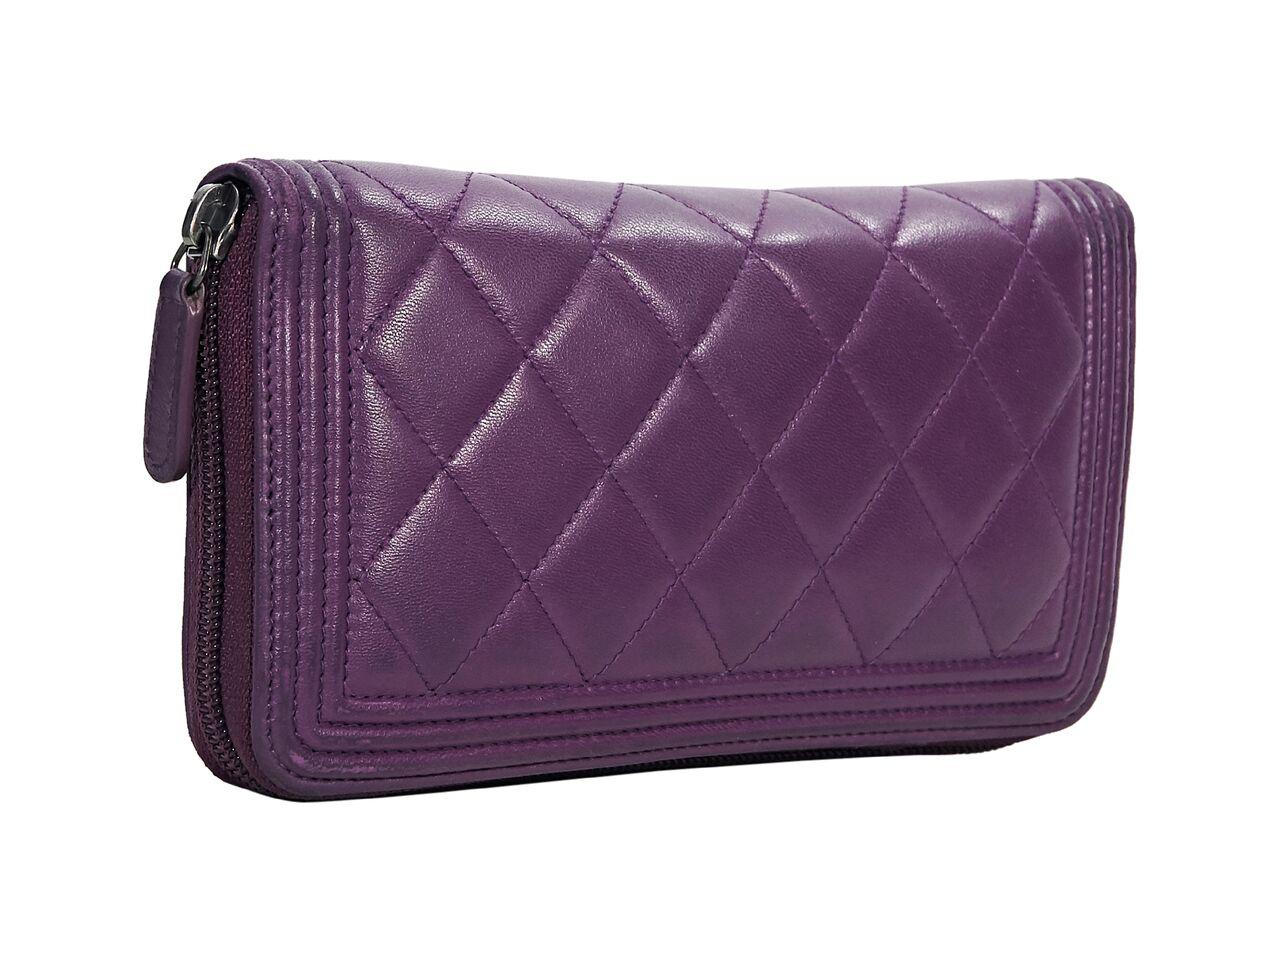 Product details:  Purple quilted leather Boy wallet by Chanel.  Zip-around closure.  Leather lined interior with multiple inner credit card slots and center zip coin pouch.  Antiqued silvertone hardware.  Dust bag included.  8